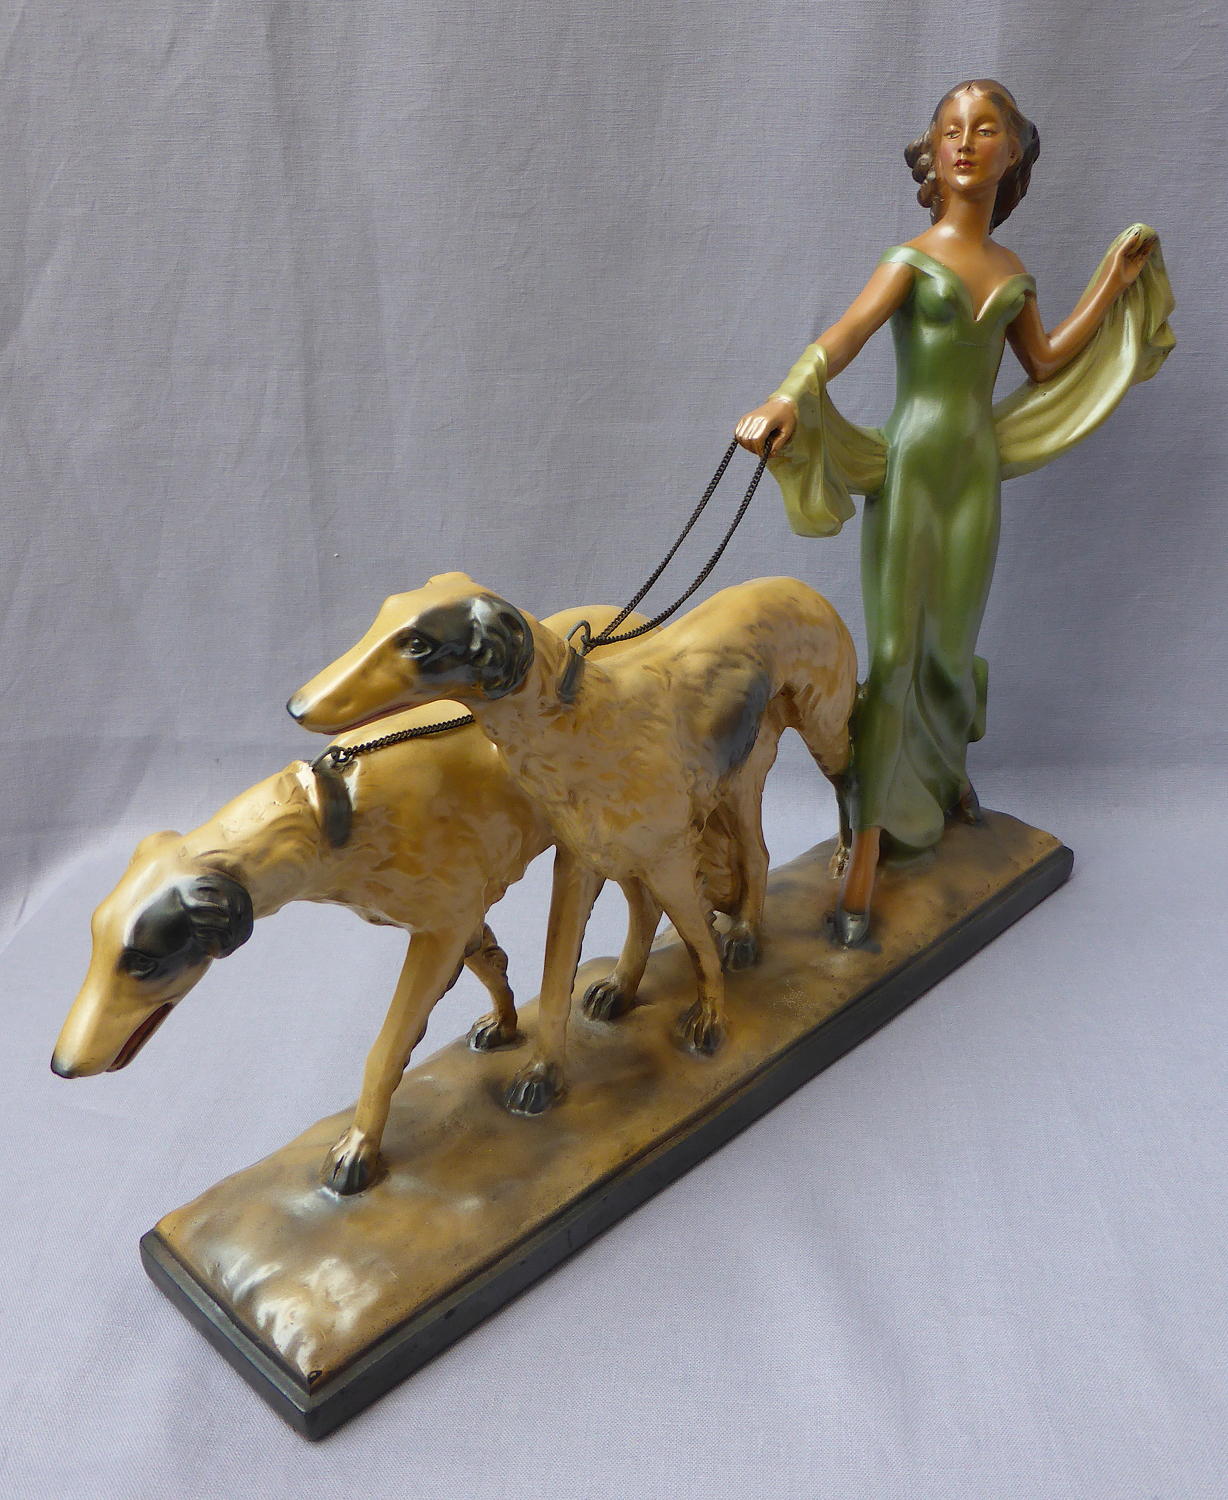 1930s Art Deco figure of woman with Borzoi dogs